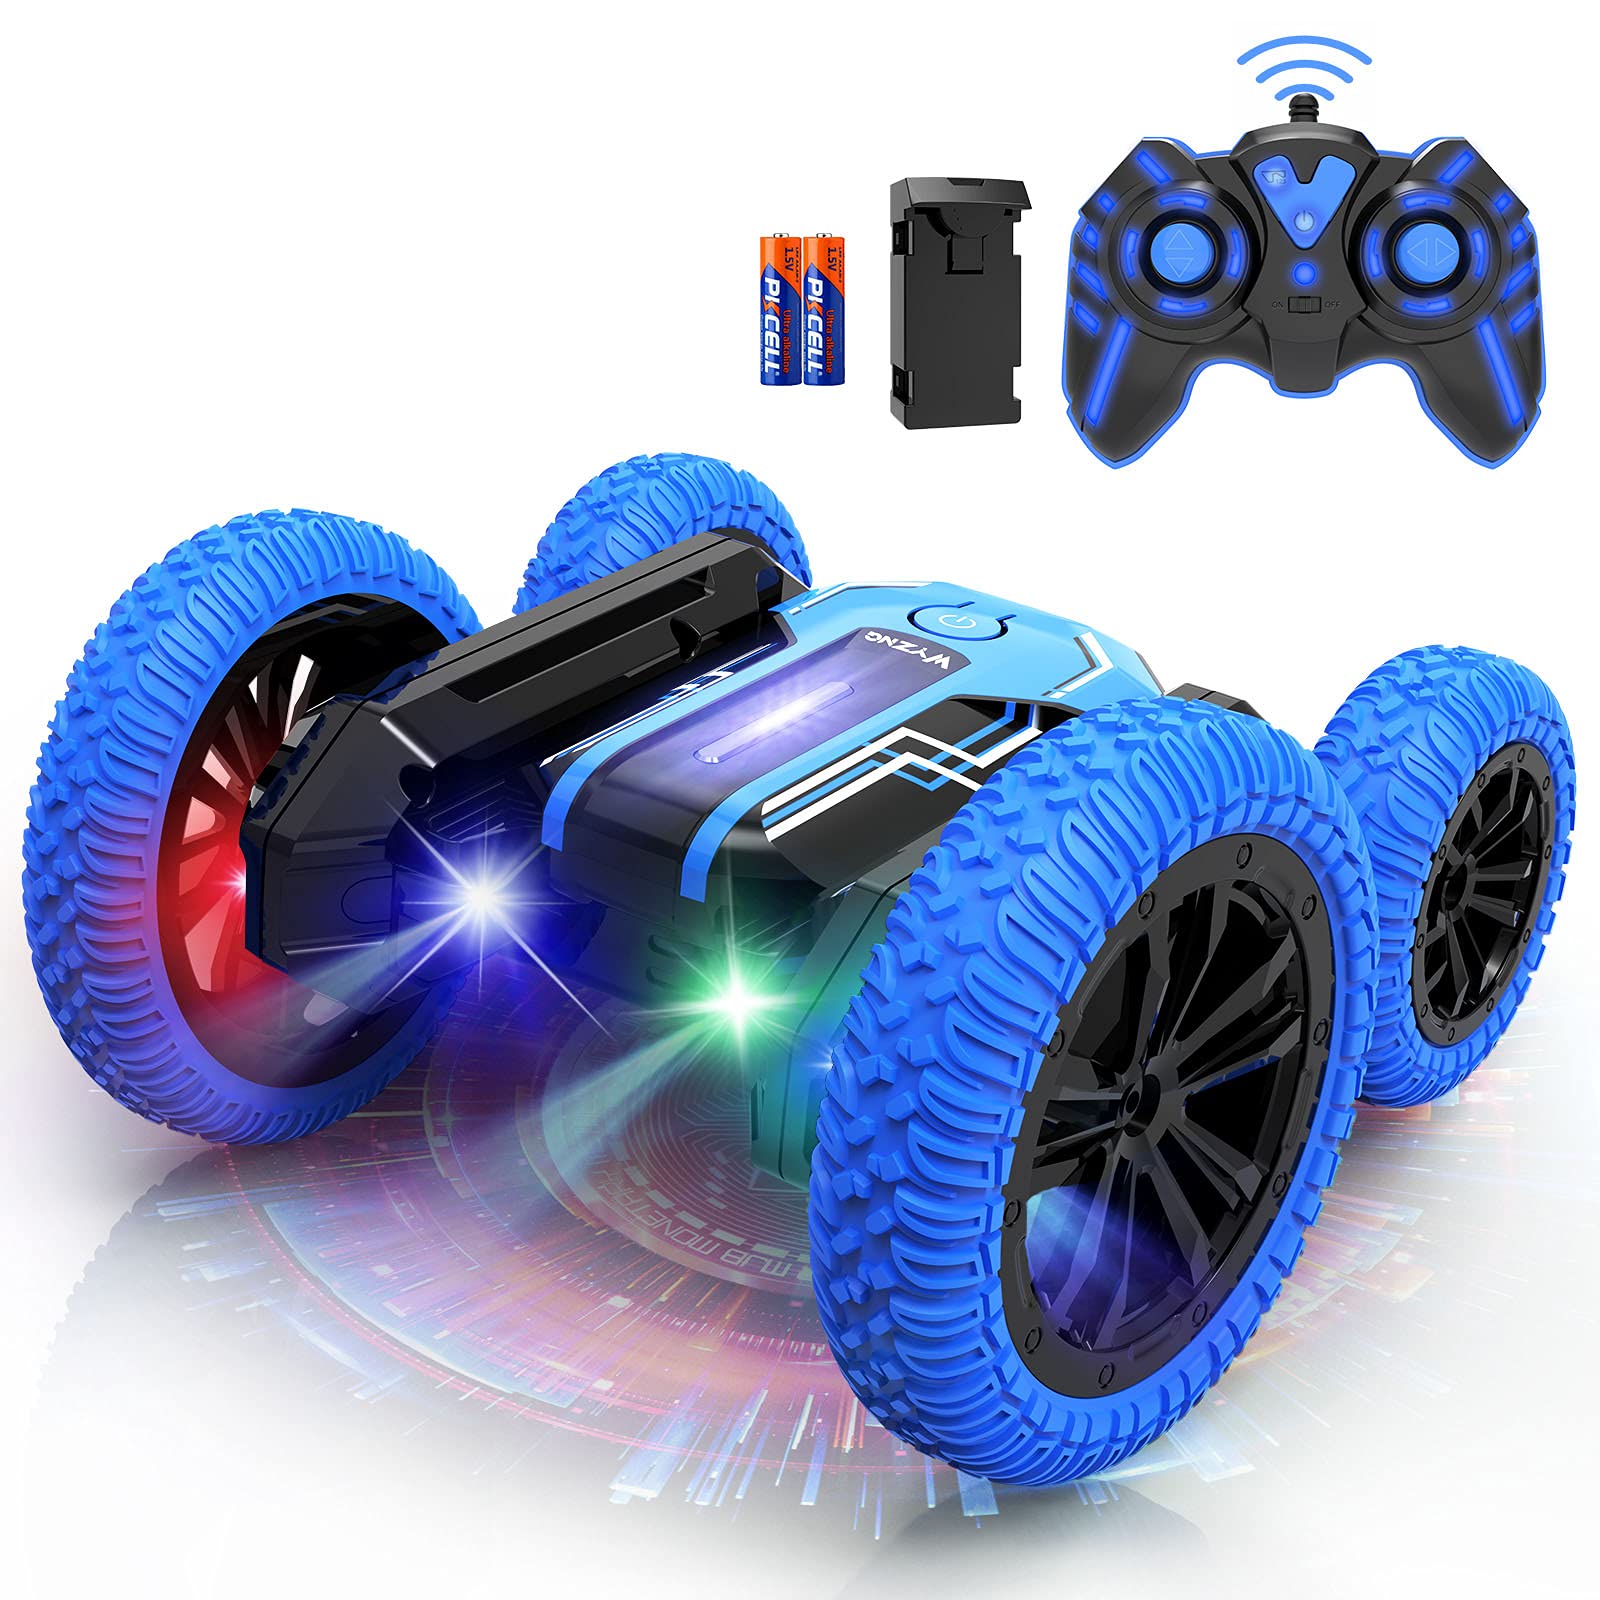 Remote Control Car, Wyzng RC Stunt Car Toy with LED Controller, 360°Flip Double Sided Stunt Car, 4WD Off-Road RC Car for Boys with 5 LED Lights, Rechargeable Battery, Toy Car for kids 5,6,7,8-12 Gifts